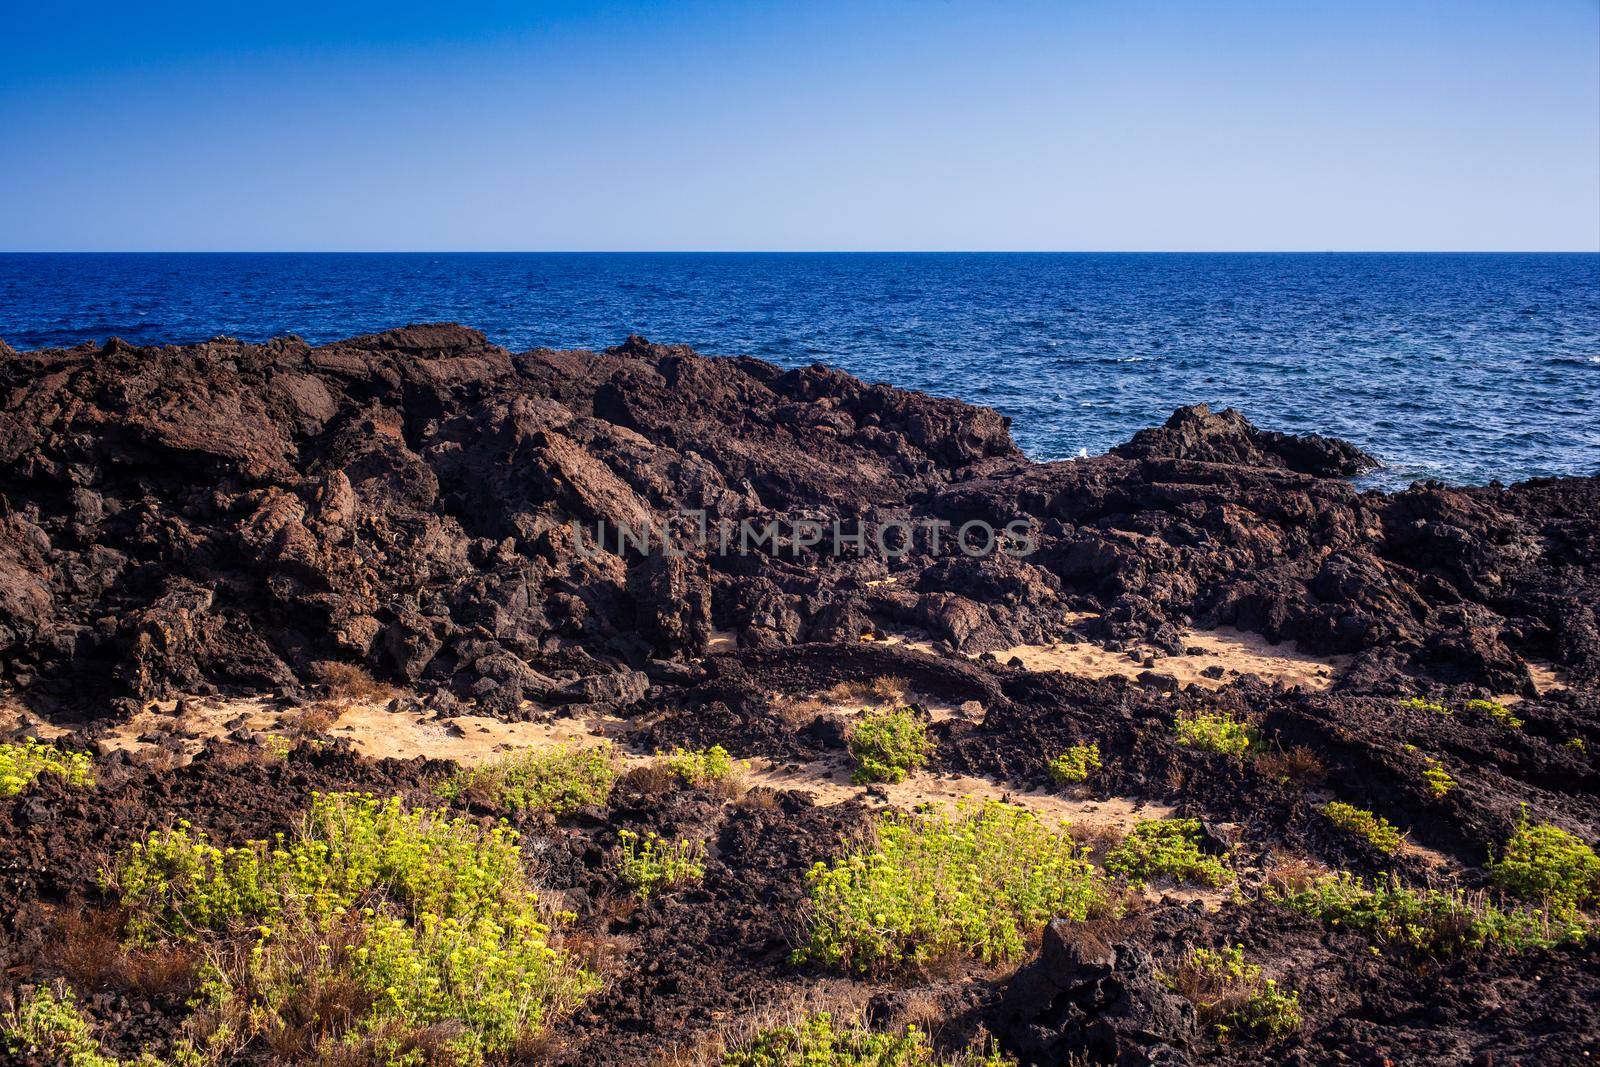 View of the scenic lava rock cliff in the Linosa island by bepsimage